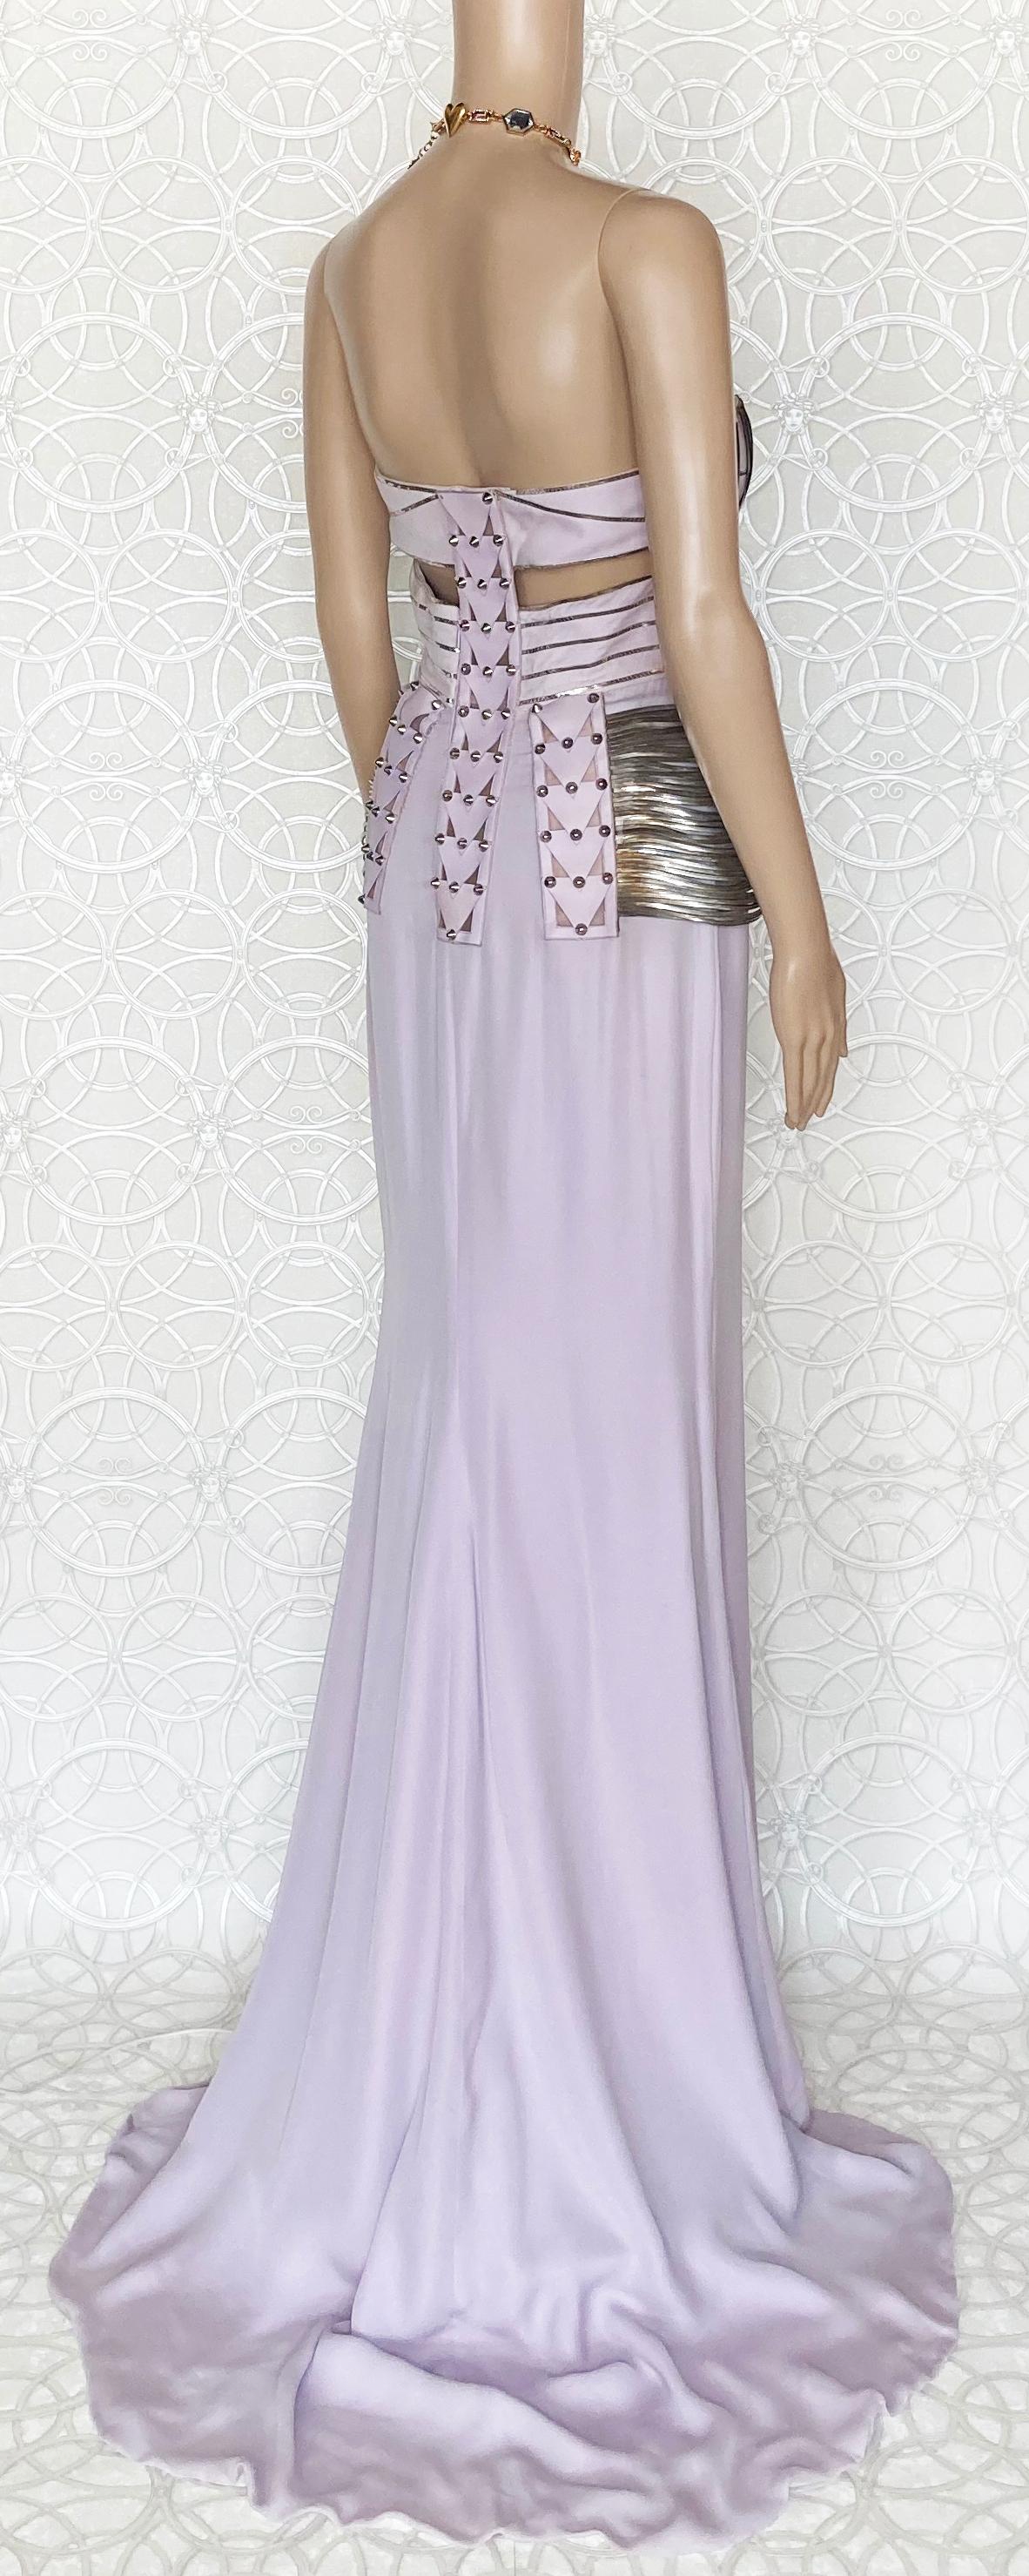 S/S 2010 L# 47 VERSACE EMBELLISHED LONG DRESS GOWN 40 - 4 as seen on DONATELLA For Sale 4